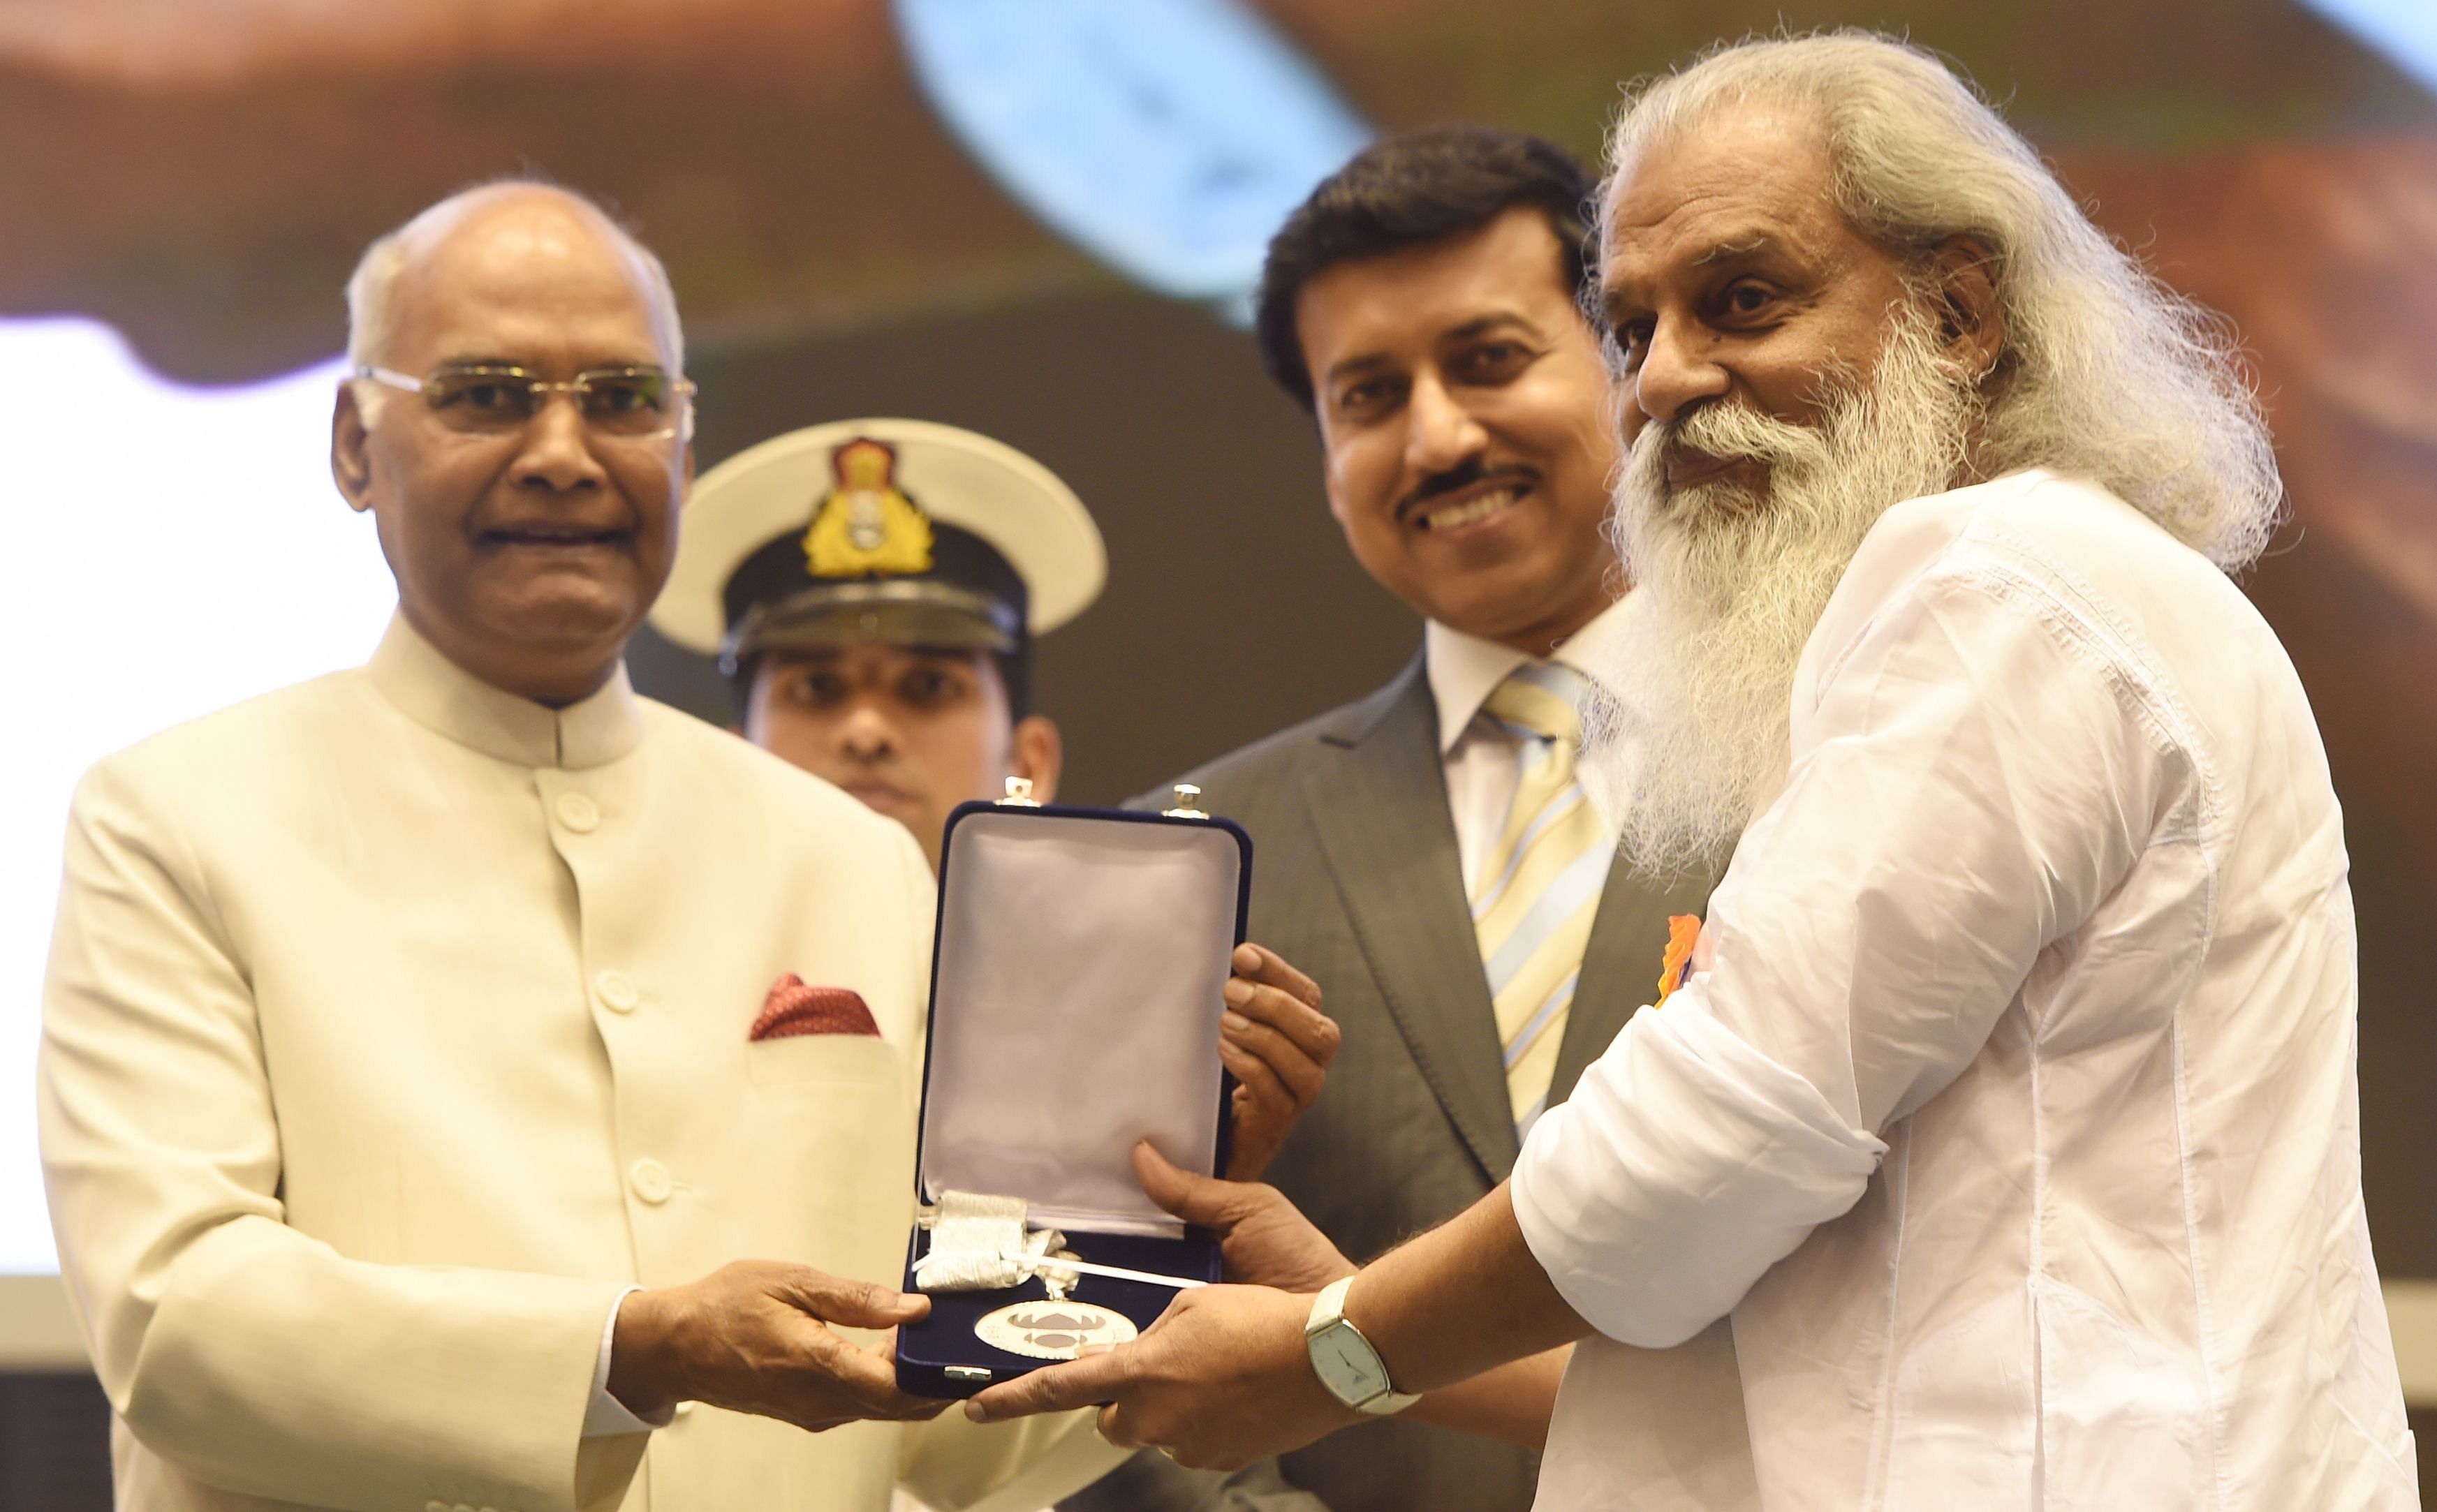 Iconic singer K J Yesudas, who received his award on Thursday, was in for severe criticism for "going against" the solidarity displayed by the award winners.